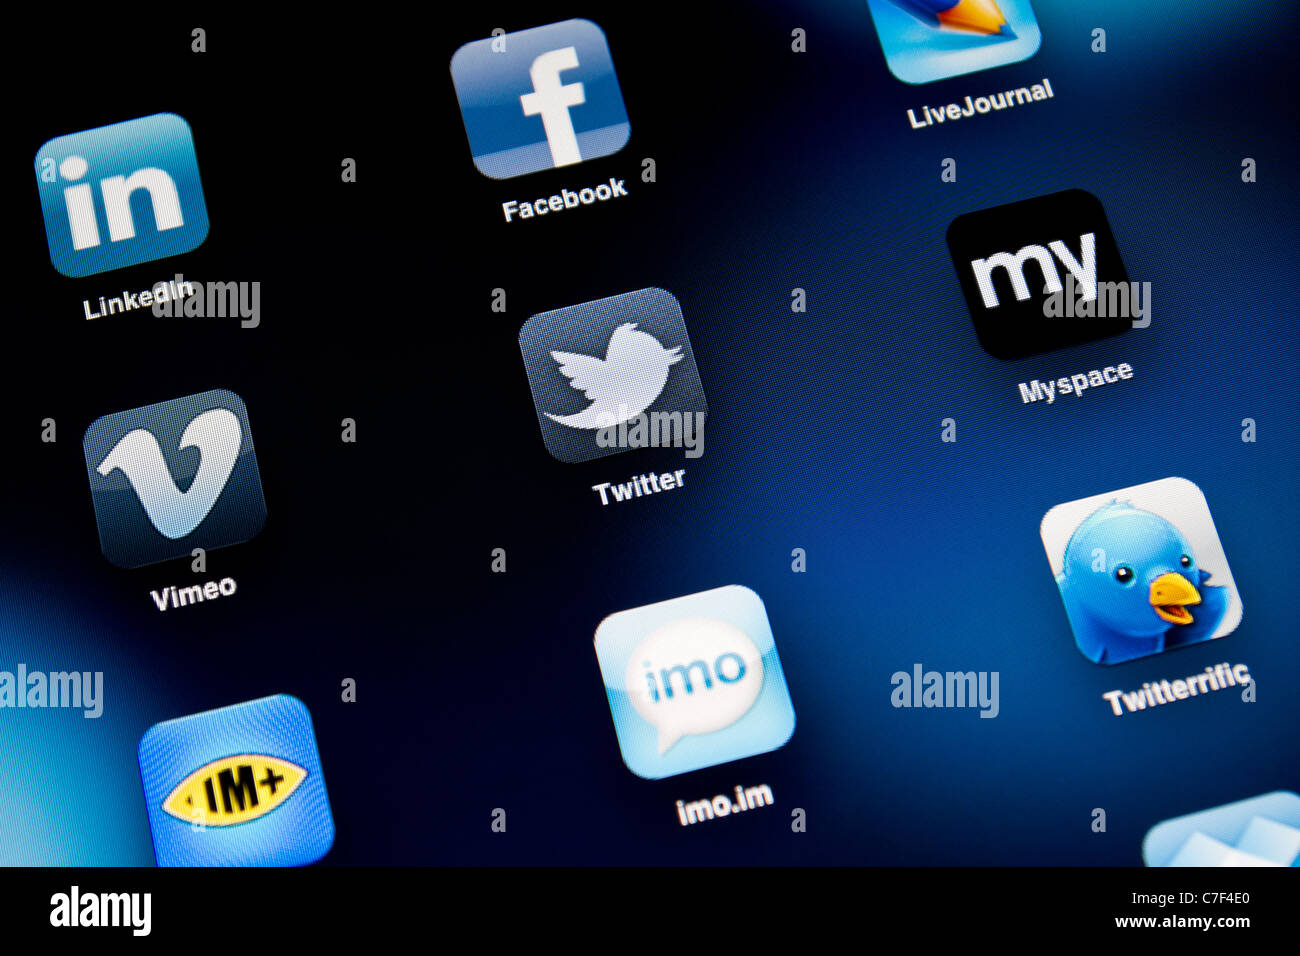 Apple iPad 2 screen showing social apps, including Facebook, Myspace, Twitter, LinkedIn, Vimeo, LiveJournal and Twitter. Stock Photo